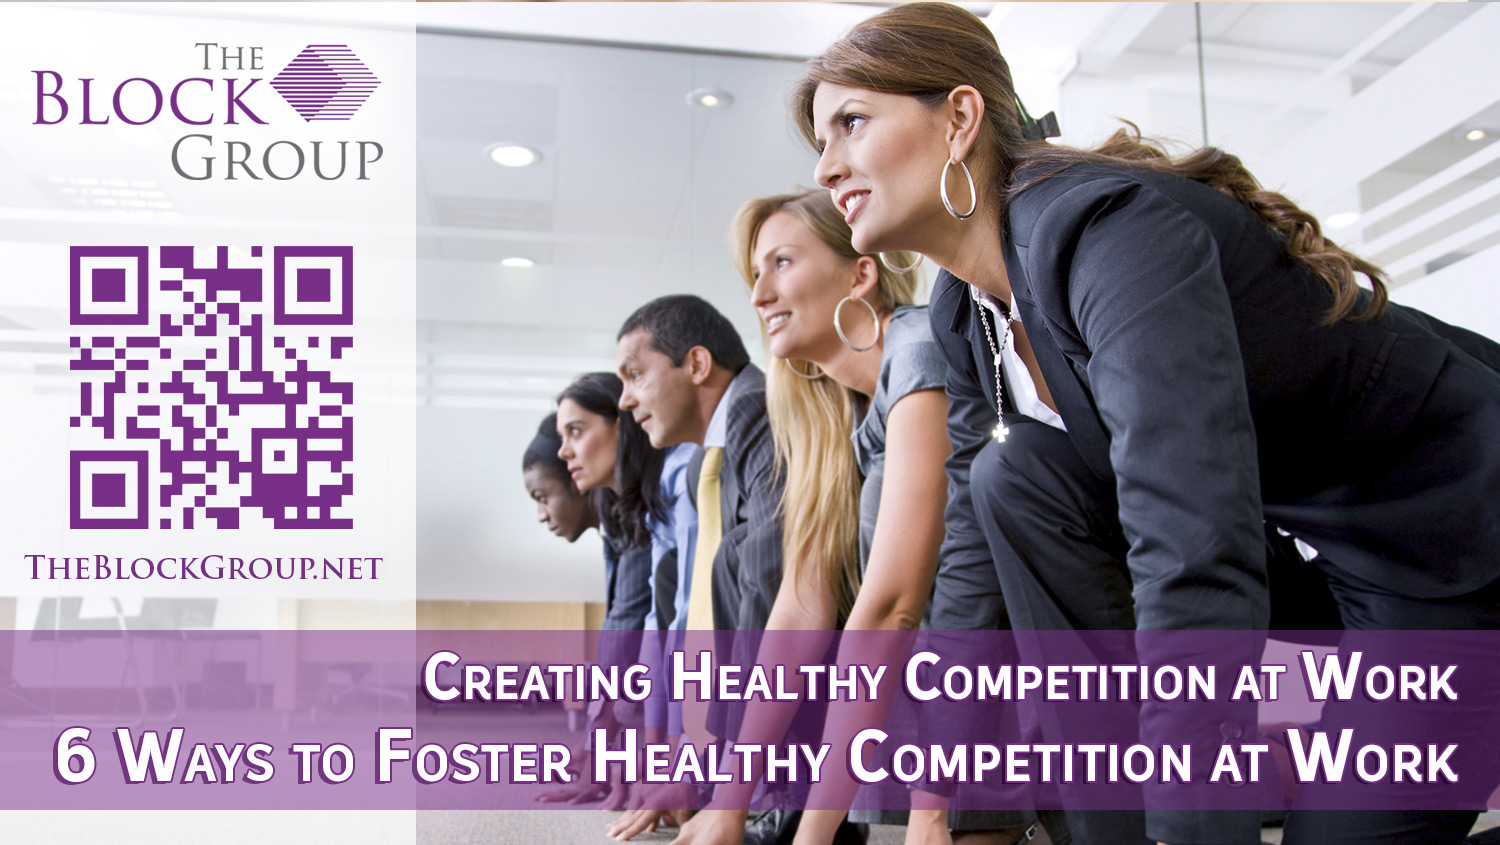 BIG-Creating-Healthy-Competition-at-Work